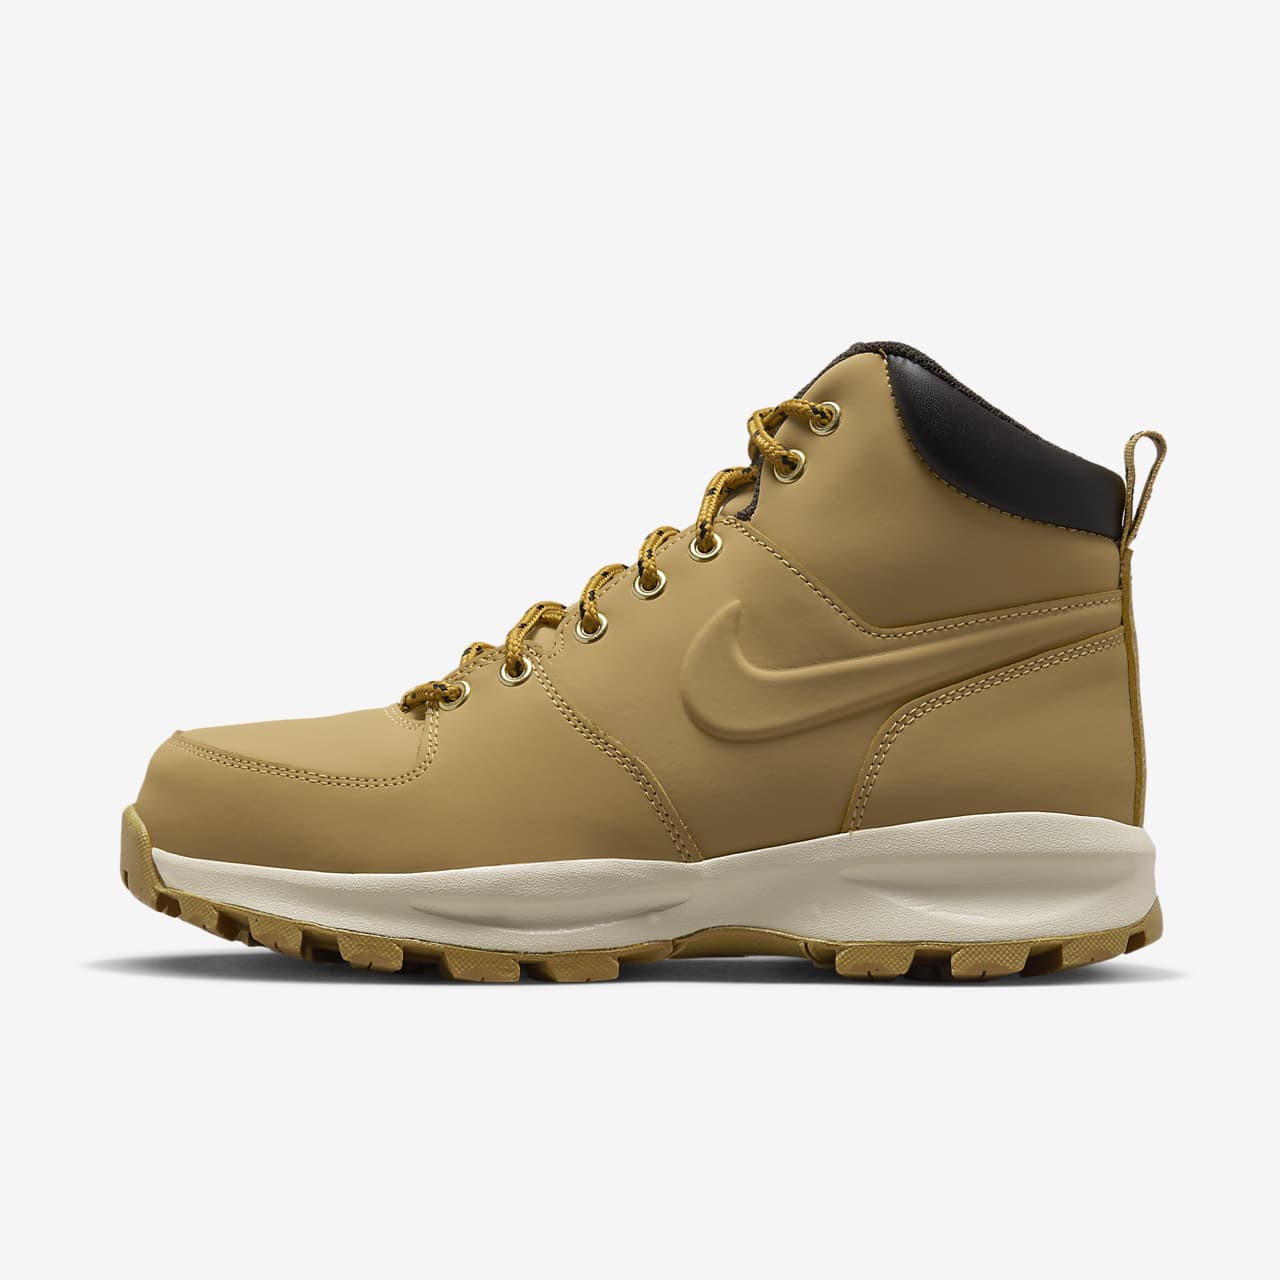 nike manoa boots review